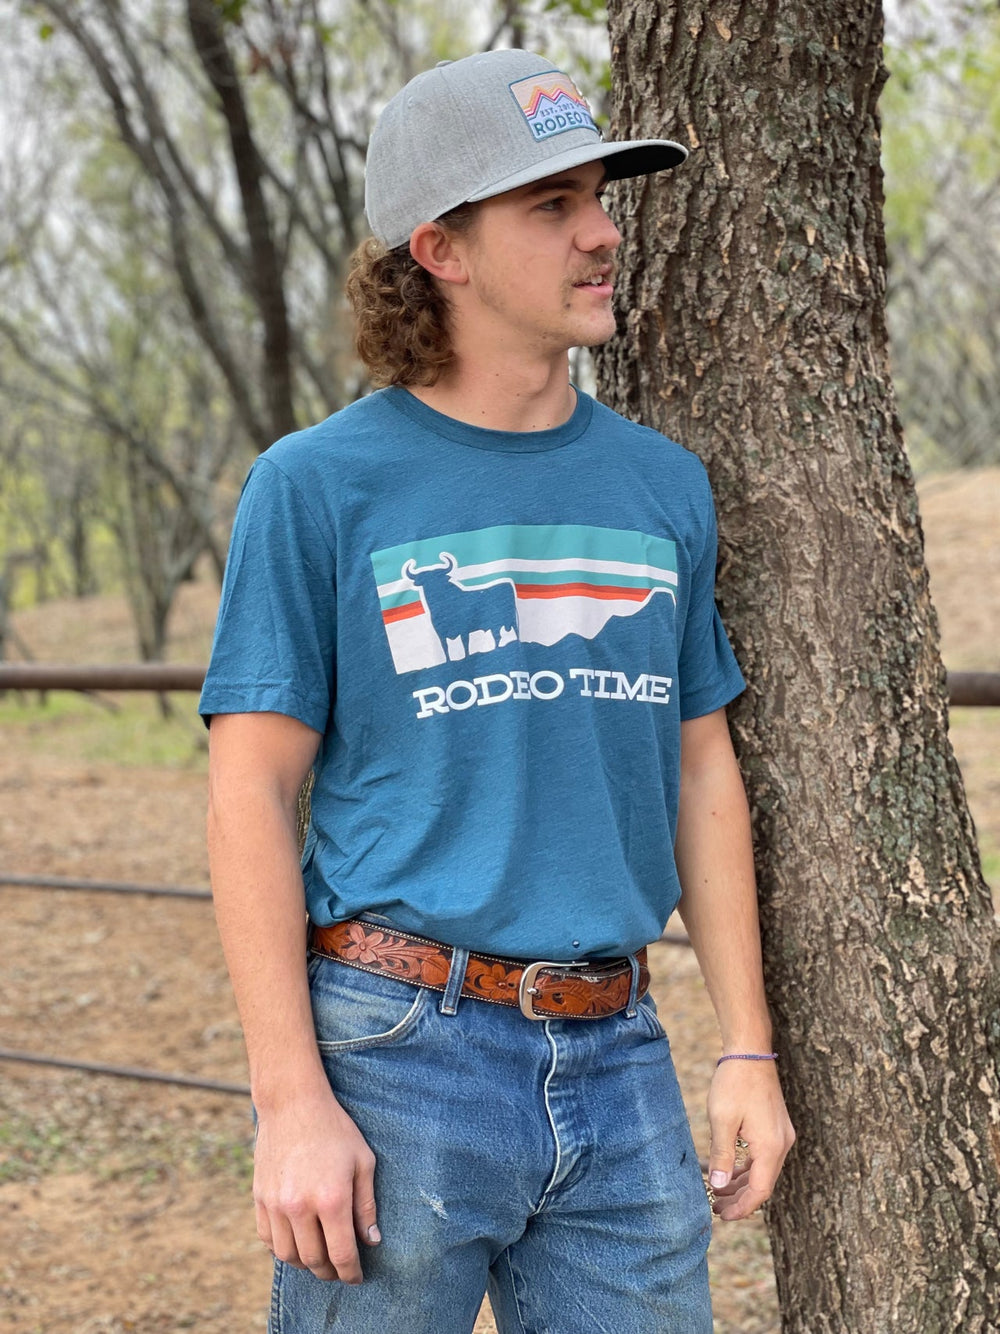 Dale Brisby Unisex T-Shirt "Sunset Rodeo Time" in Teal